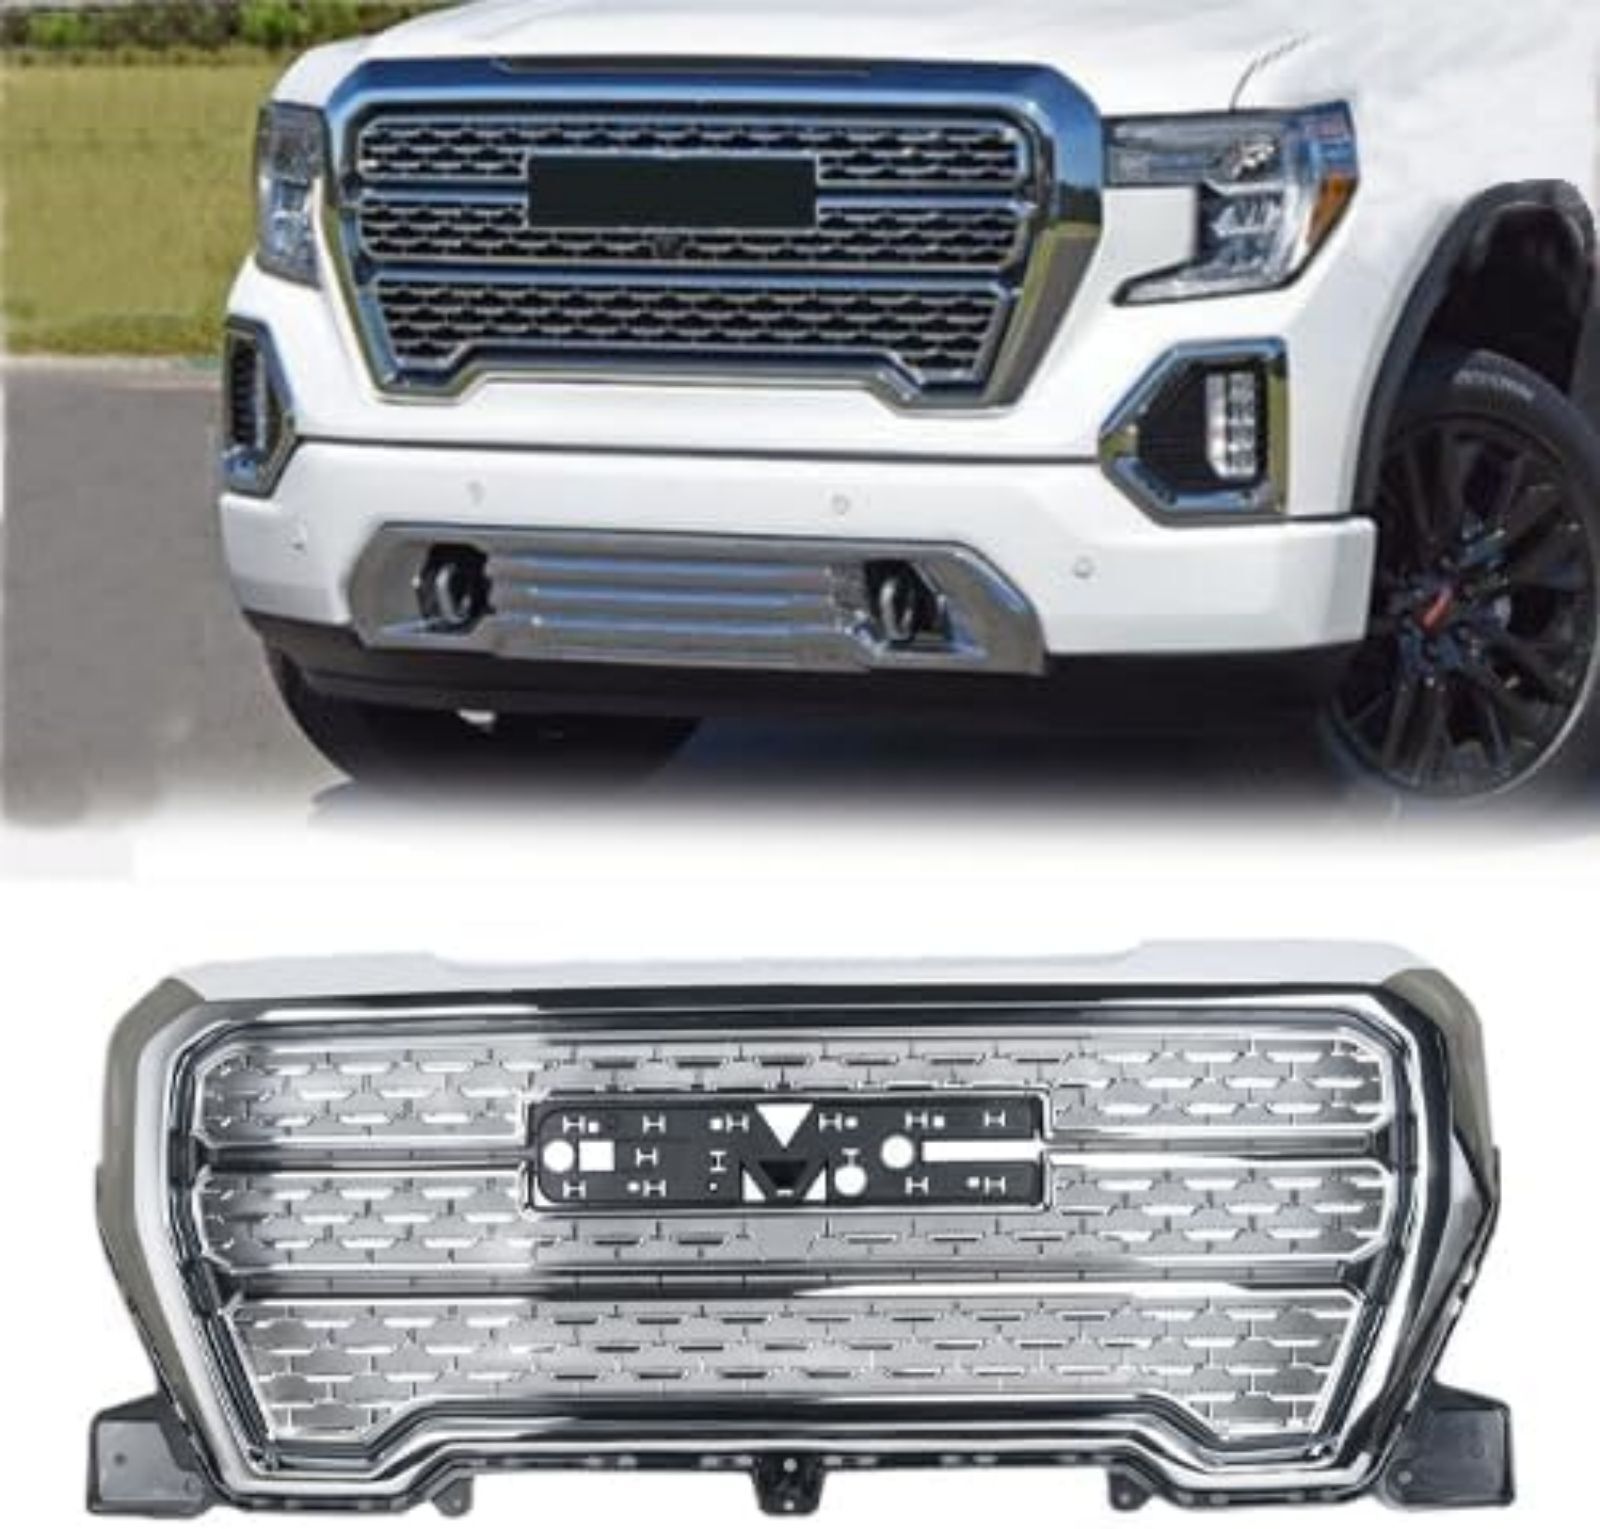 VICTOCAR Front Upper Chrome Grille Fits 2019-2021 GMC Sierra 1500 Denali Style